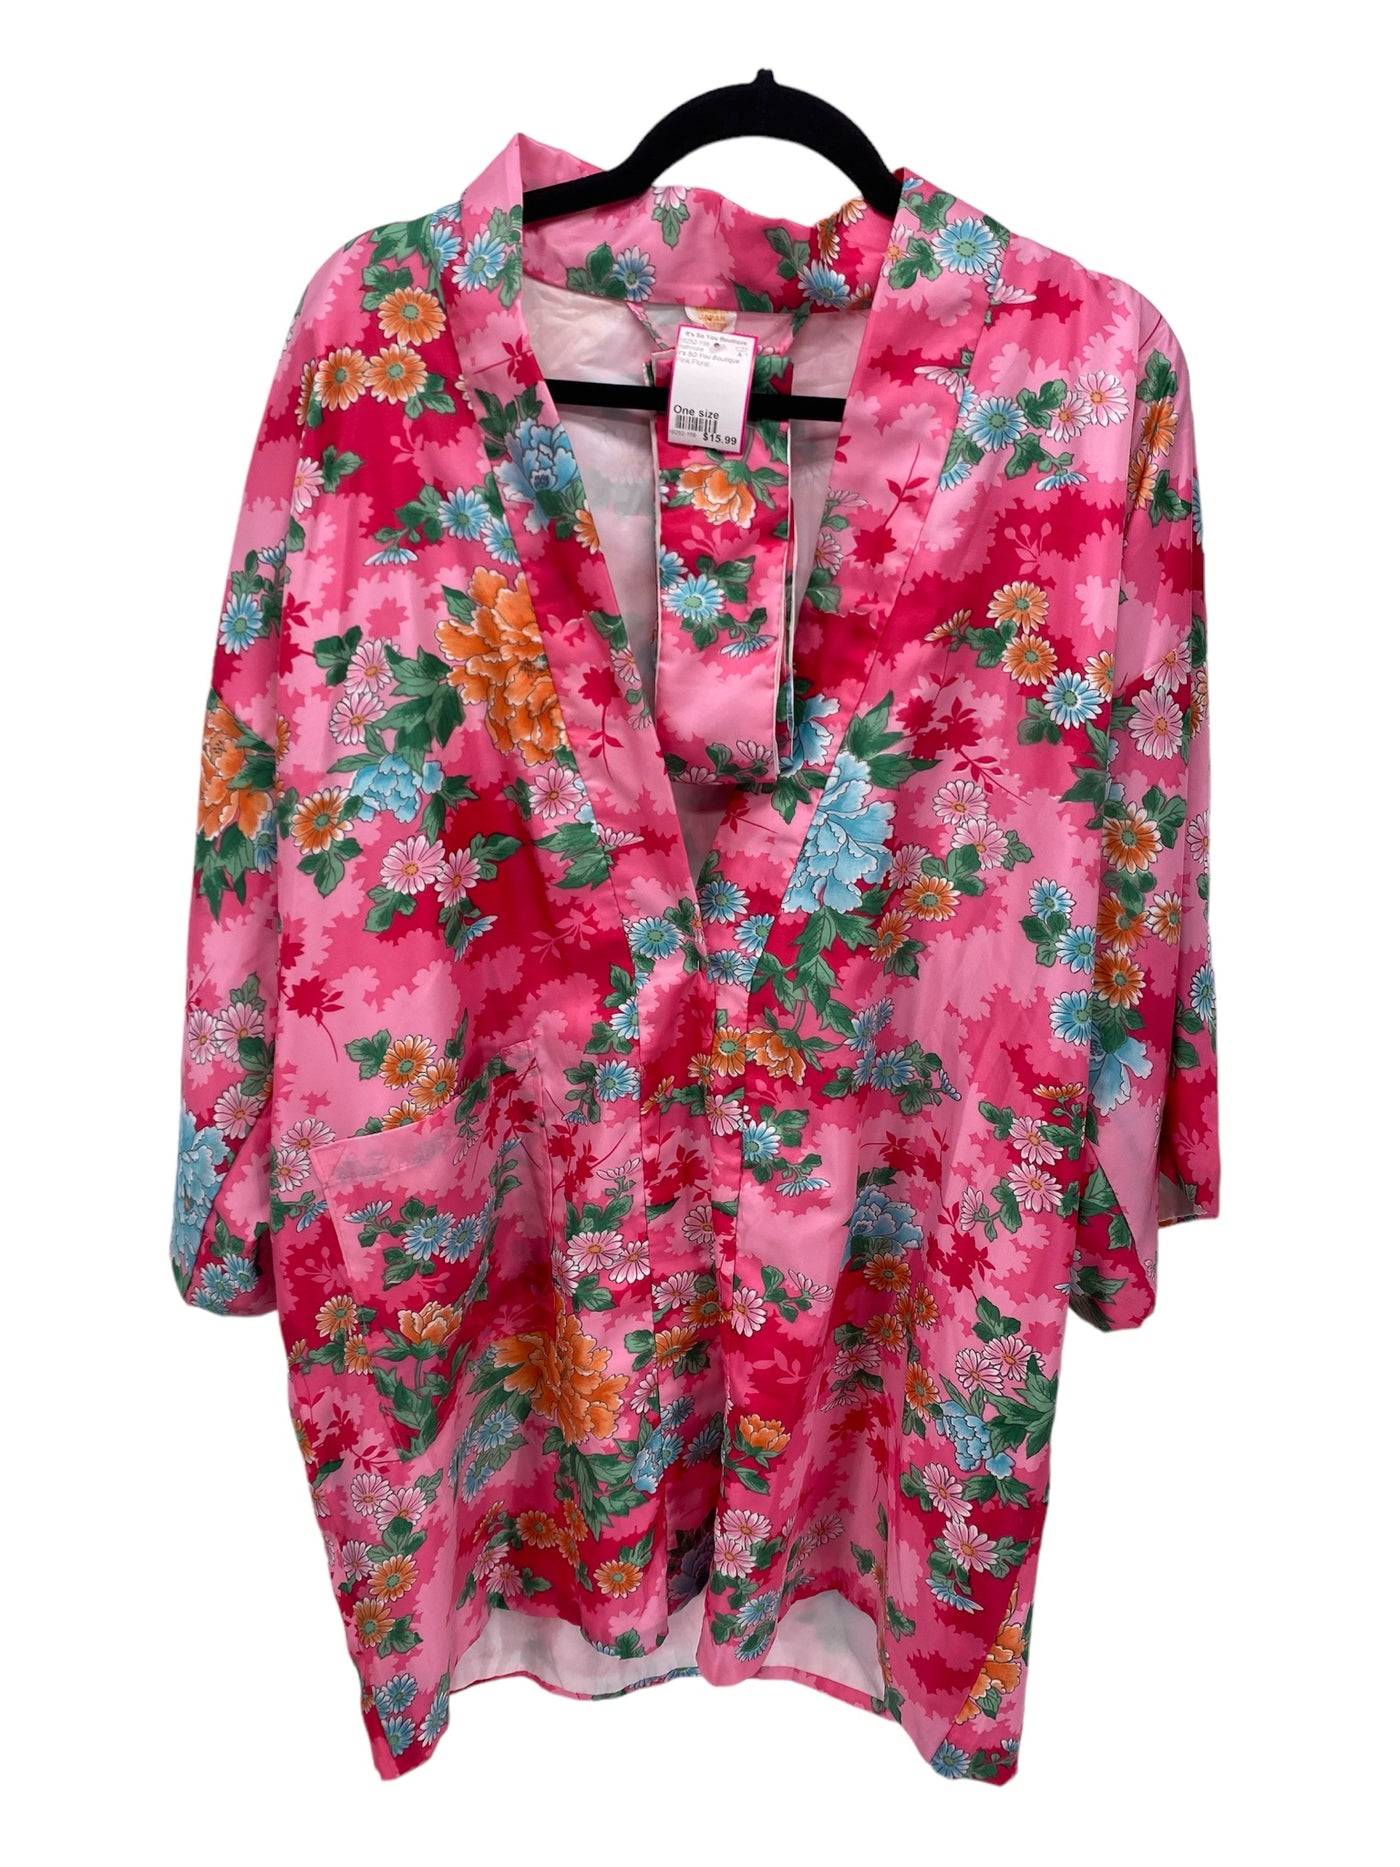 It's SO You Boutique Misses Size One size Pink Floral Bathrobe